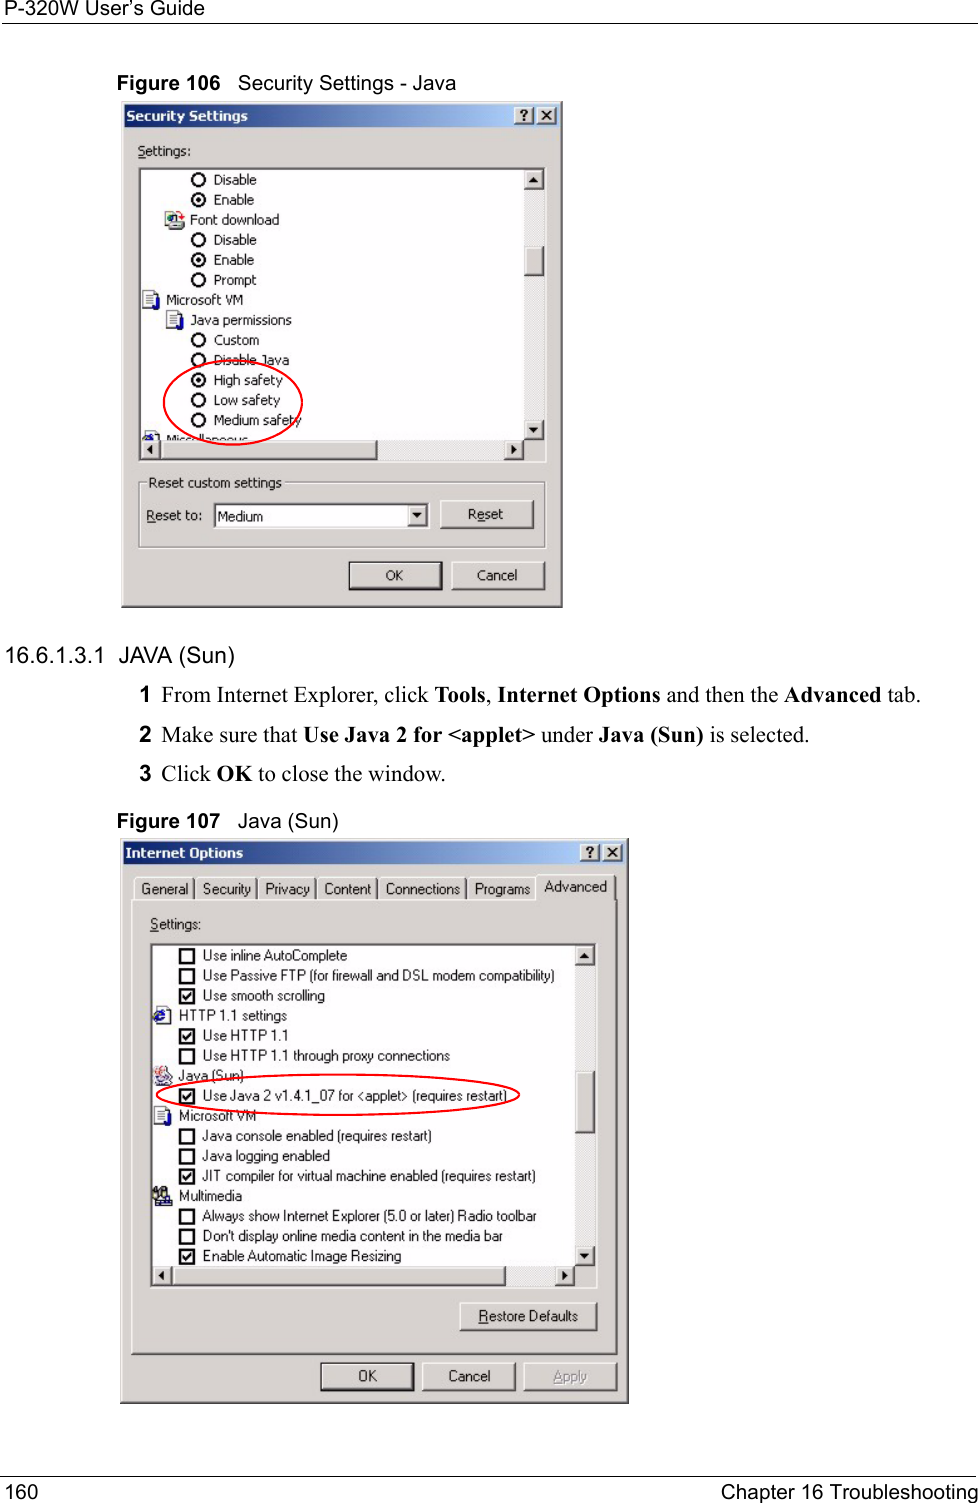 P-320W User’s Guide160  Chapter 16 TroubleshootingFigure 106   Security Settings - Java 16.6.1.3.1  JAVA (Sun)1From Internet Explorer, click Tools, Internet Options and then the Advanced tab. 2Make sure that Use Java 2 for &lt;applet&gt; under Java (Sun) is selected.3Click OK to close the window.Figure 107   Java (Sun)